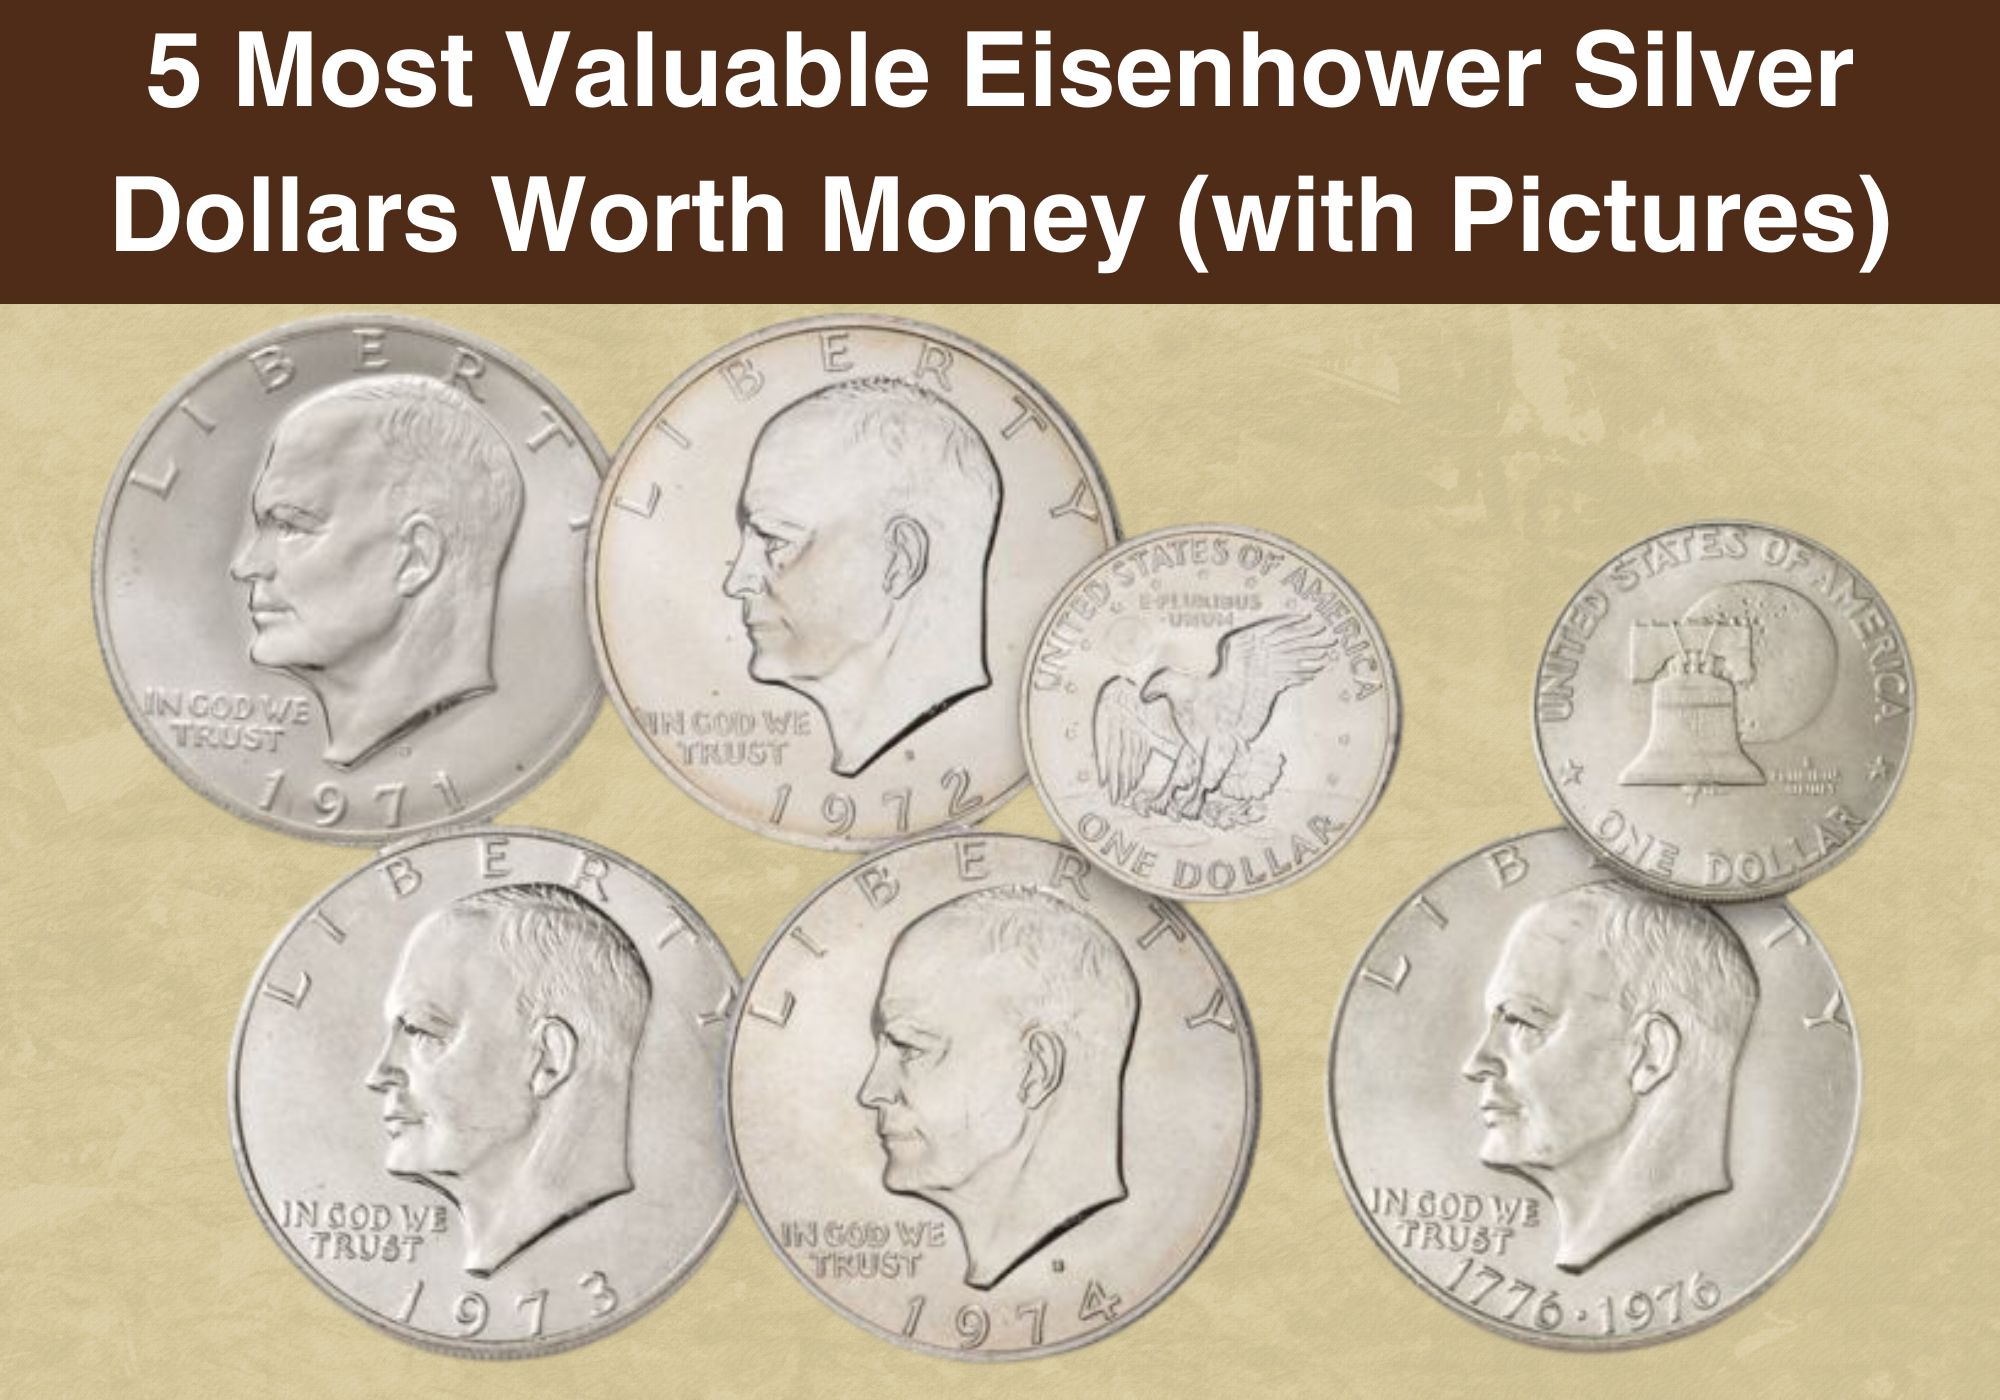 5 Most Valuable Eisenhower Silver Dollar Coins Worth Money (with Pictures)